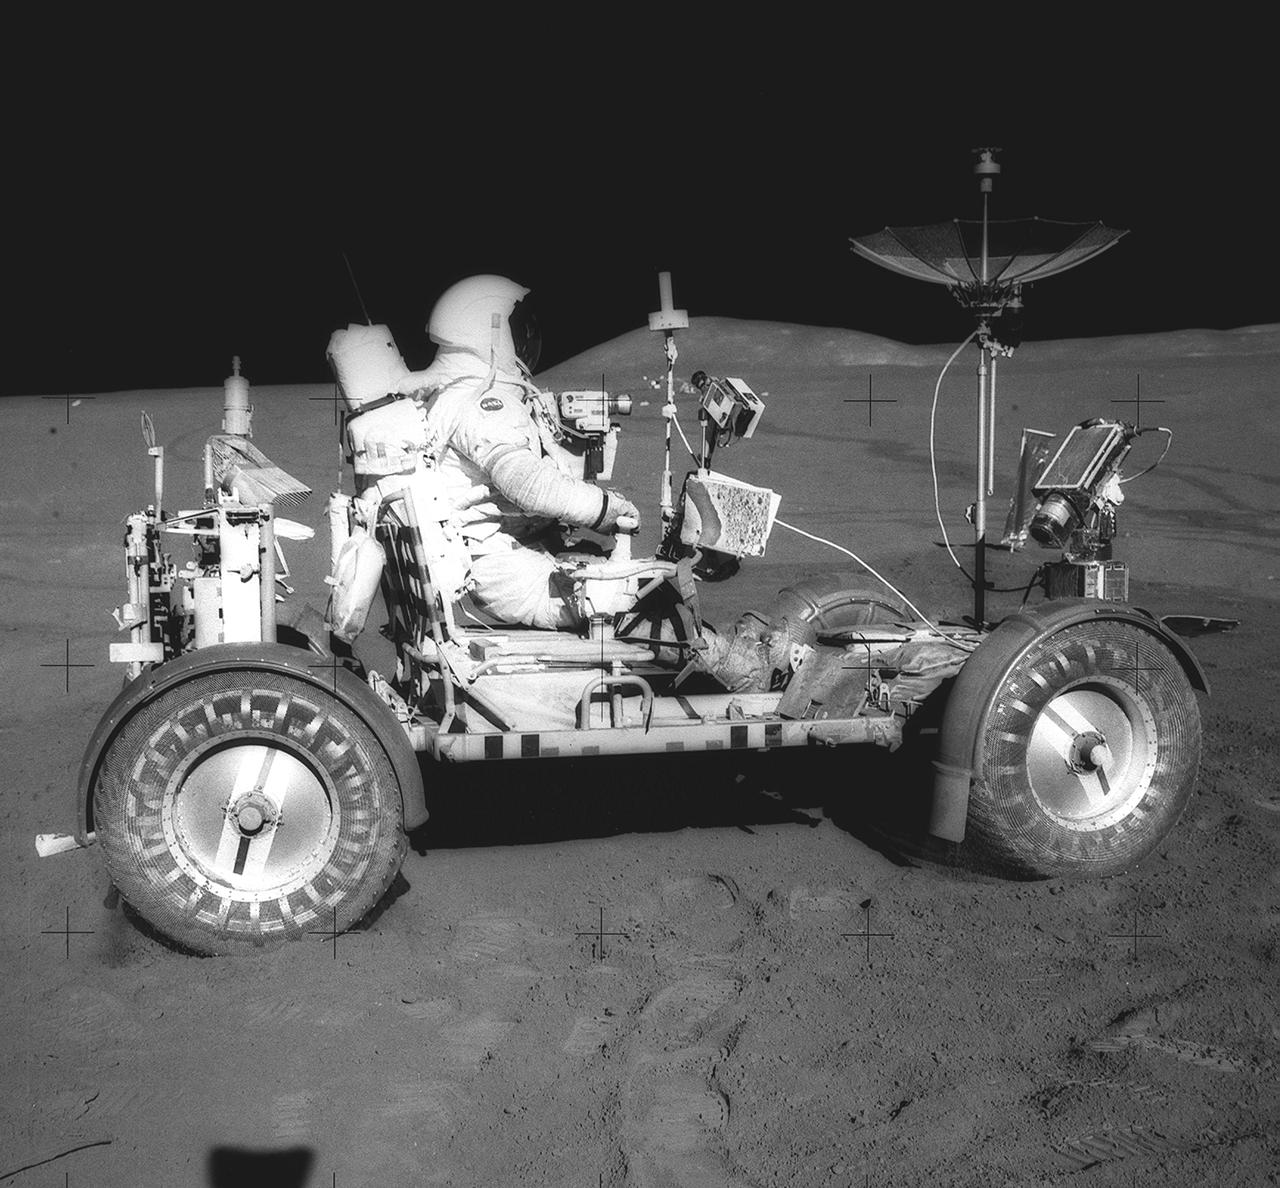 This photograph was taken during the Apollo 15 mission on the lunar surface. Astronaut David R. Scott waits in the Lunar Roving Vehicle (LRV) for astronaut James Irwin for the return trip to the Lunar Module, Falcon, with rocks and soil collected near the Hadley-Apernine landing site.